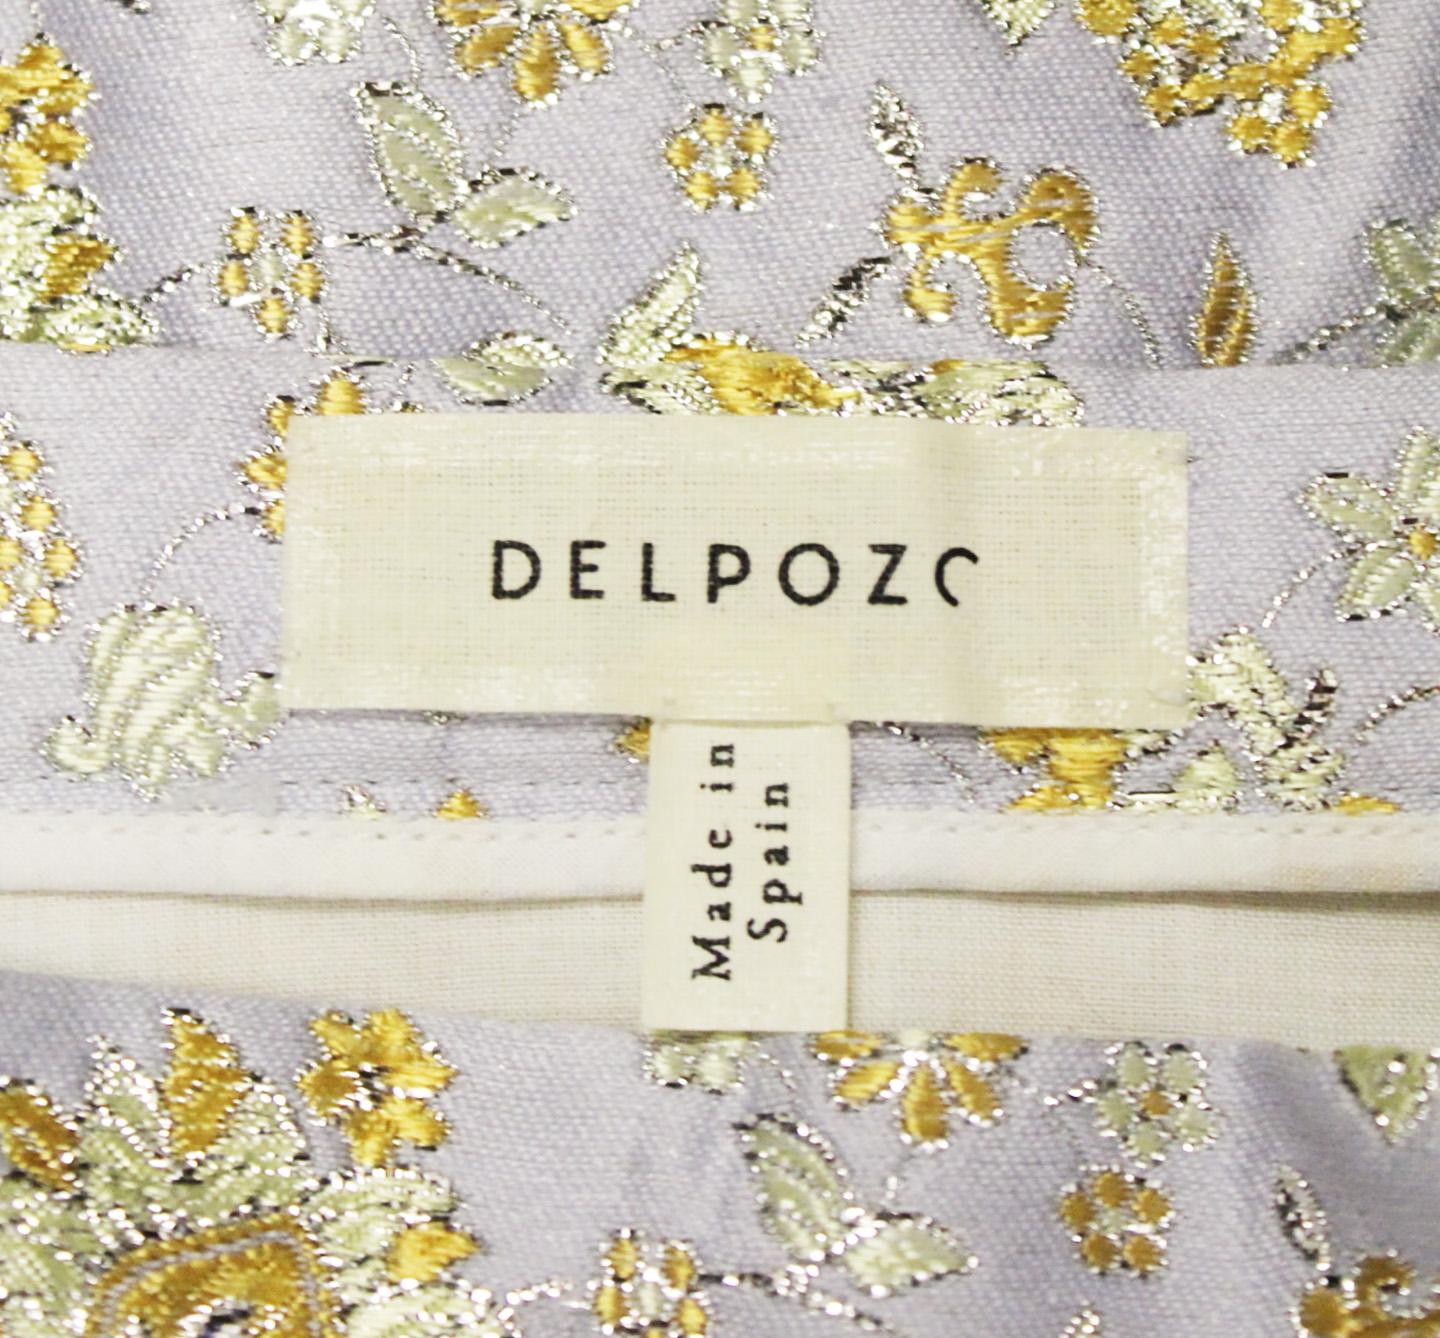 Delpozo Floral Sky Blue Skirt Embroidered w/ Gold Metallic Threads 44 EU In Excellent Condition For Sale In Palm Beach, FL